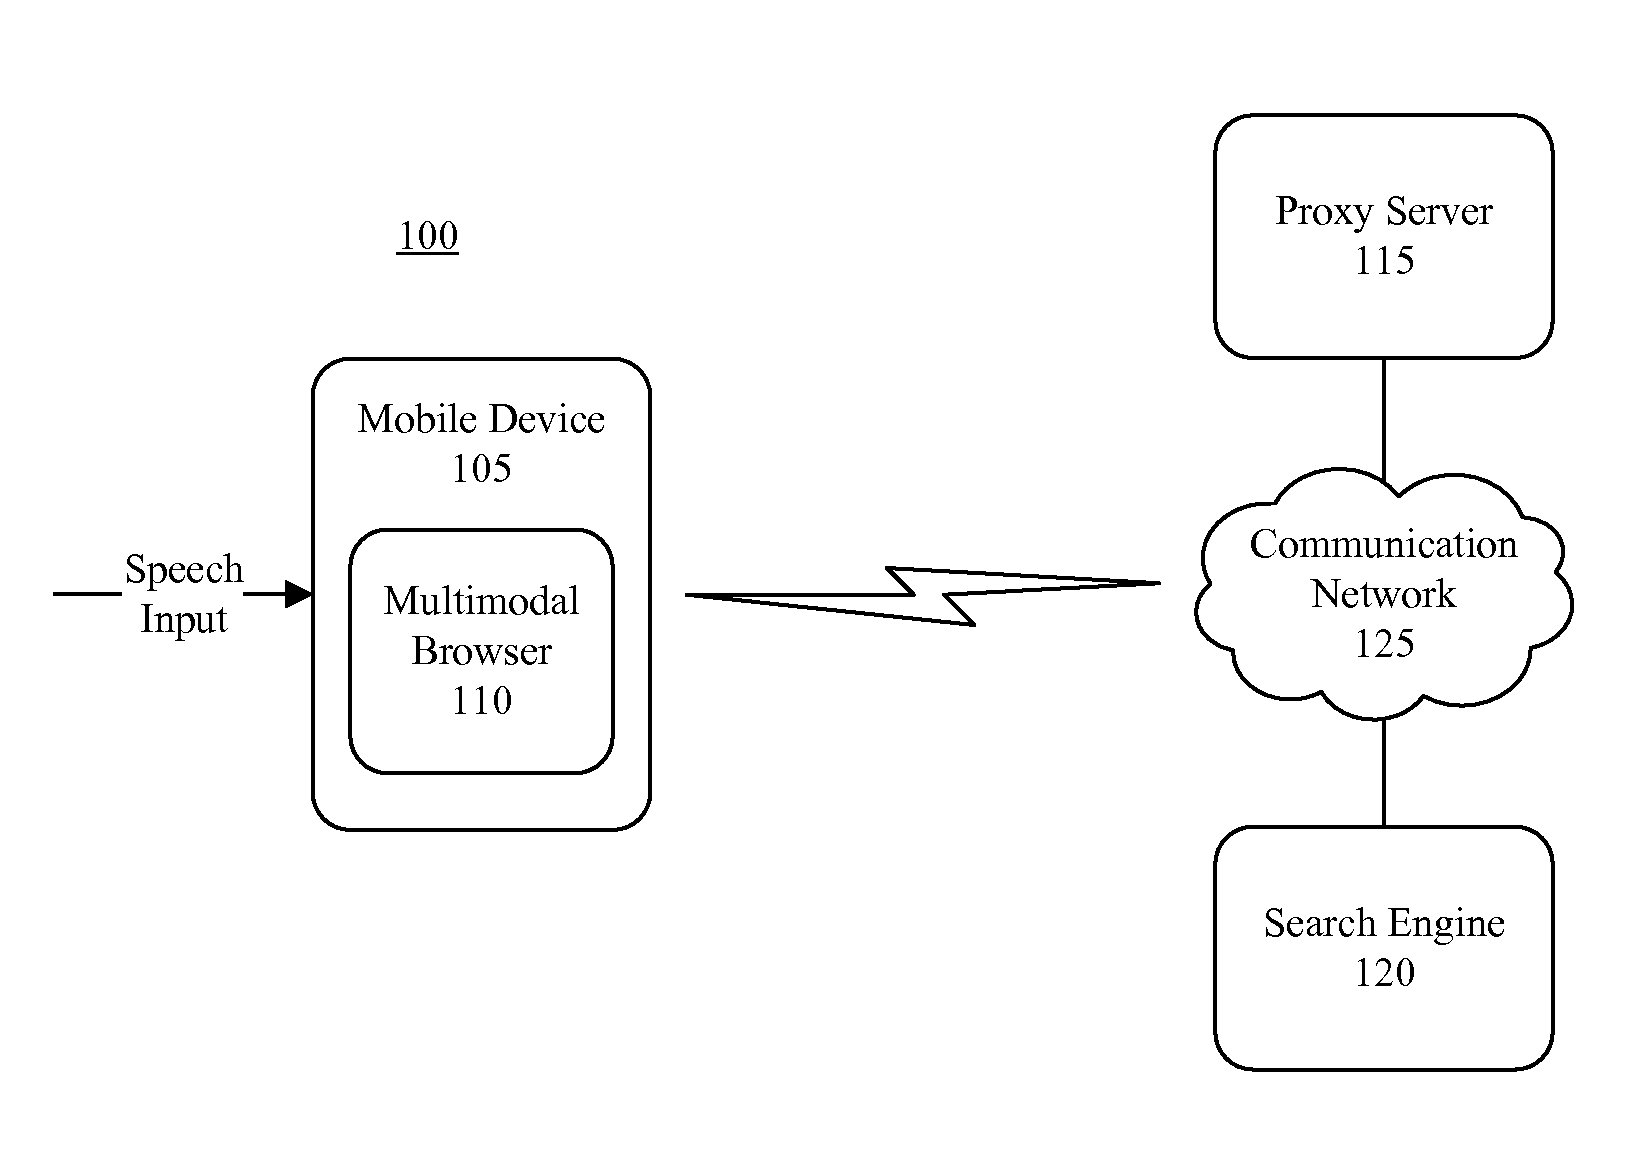 Retrieval and Presentation of Network Service Results for Mobile Device Using a Multimodal Browser